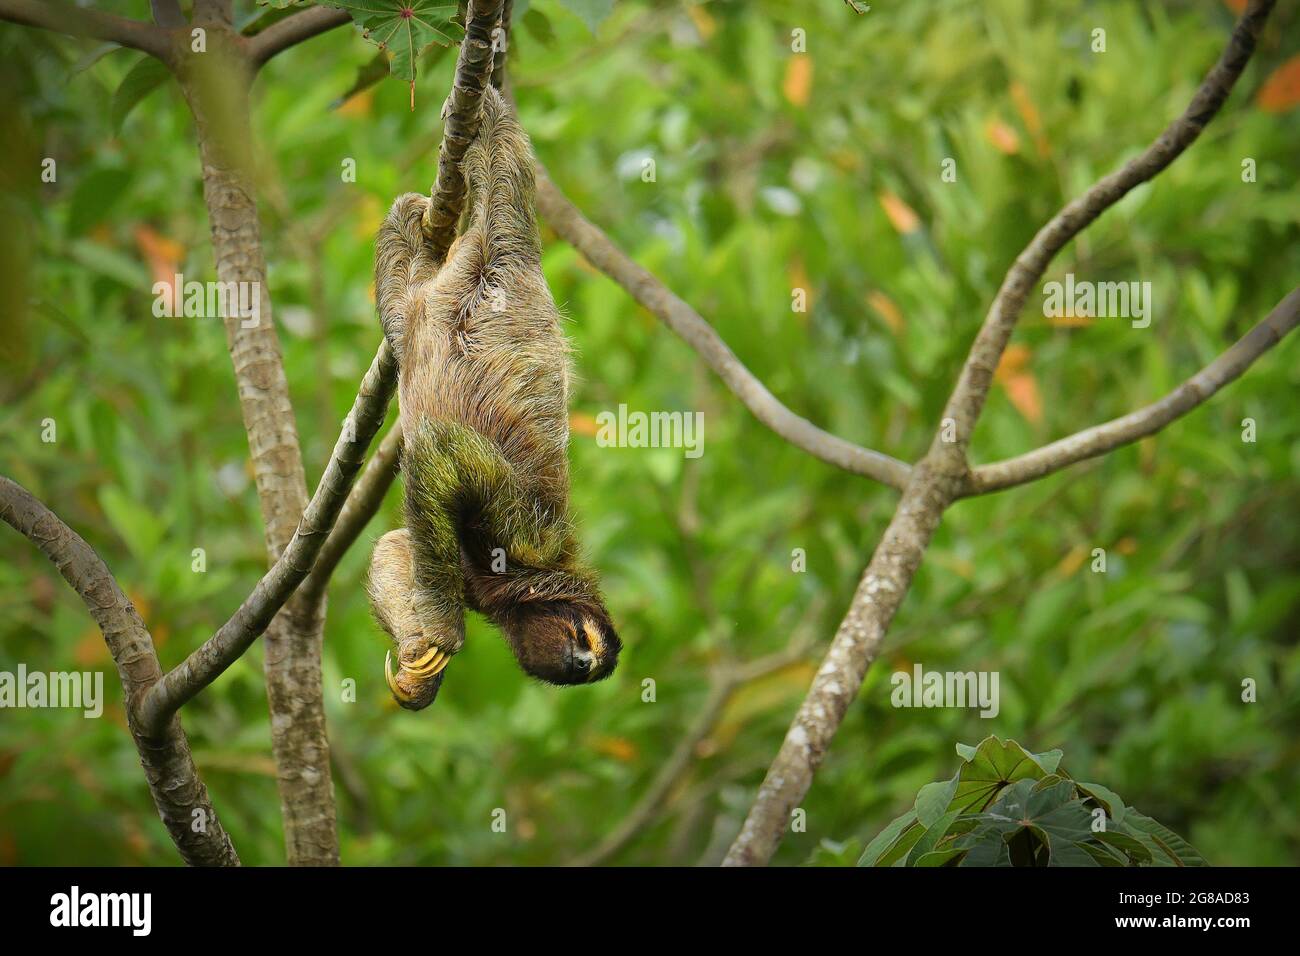 Brown-throated sloth - Bradypus variegatus species of three-toed sloth found in the Neotropical realm of Central and South America, mammal found in th Stock Photo